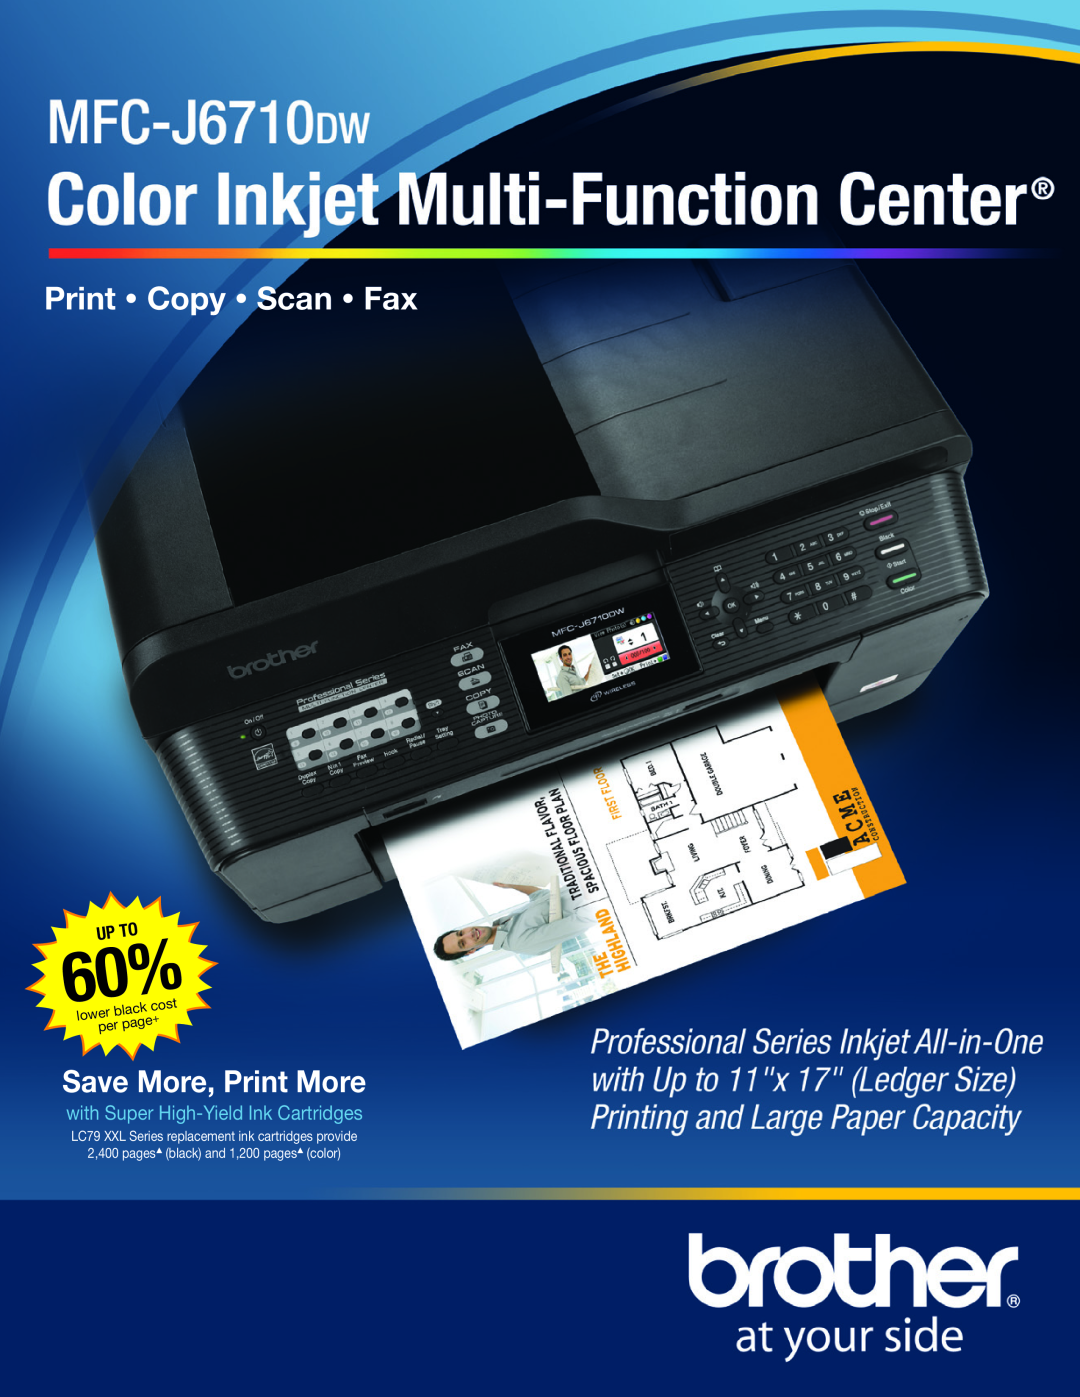 Brother MFC-J6710DW manual k cos, r blac, lowe, per page, Print Copy Scan Fax, Save More, Print More, Up To 